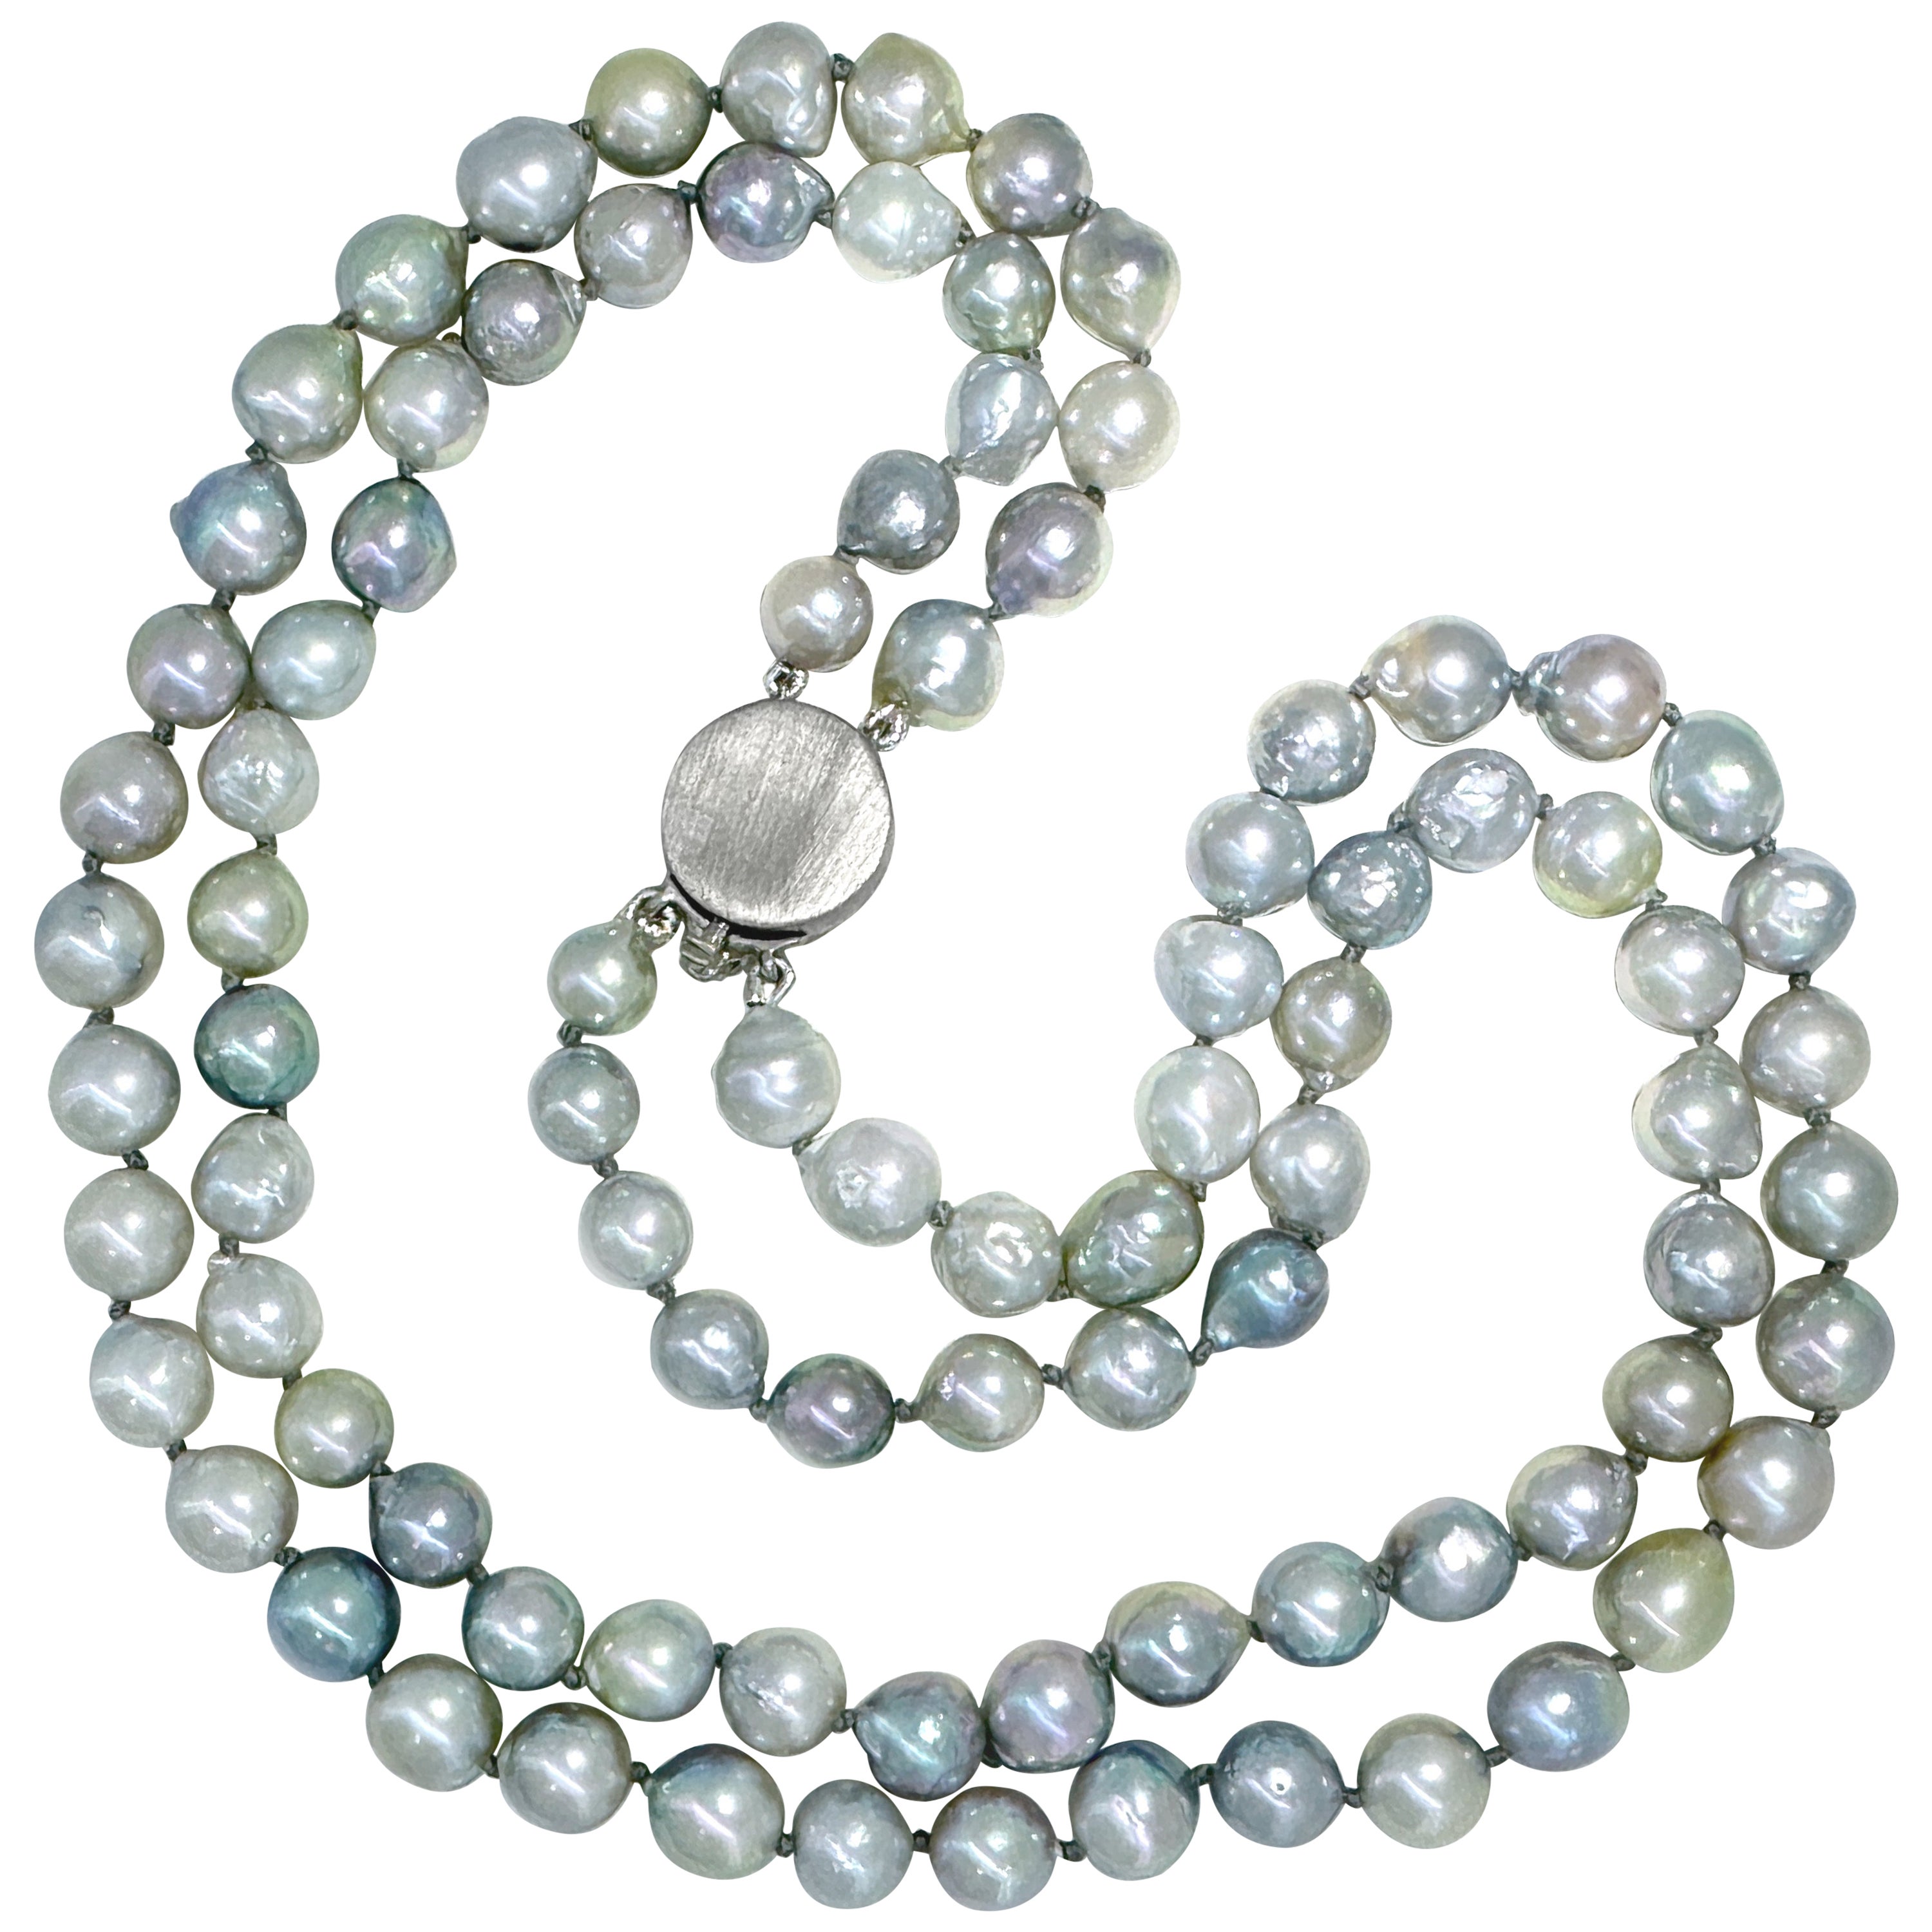 Frosty Baroque Akoya Pearls in 17" Two-Strand Necklace with Vintage Gold Clasp